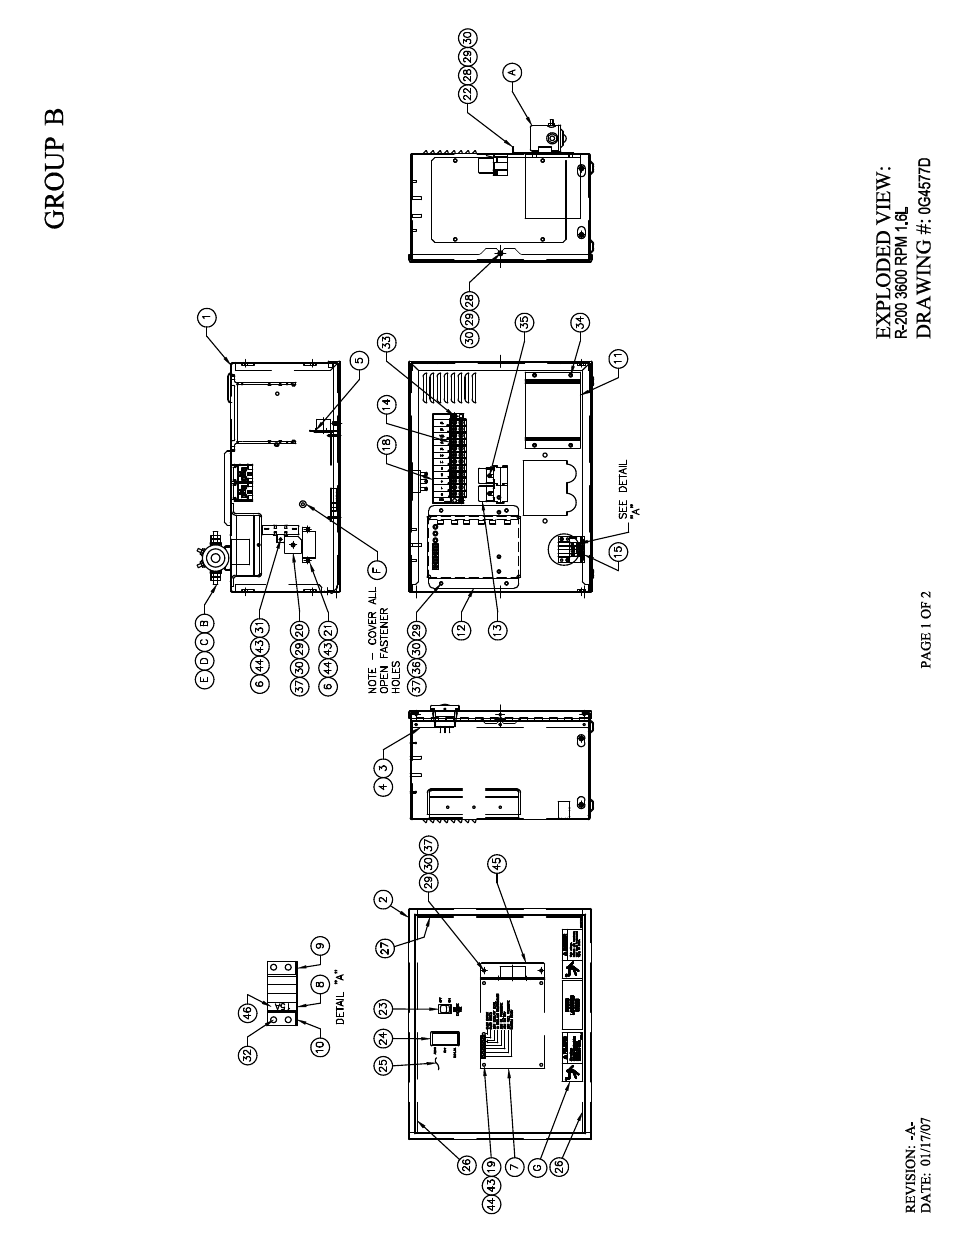 LG 30kW User Manual | Page 28 / 60